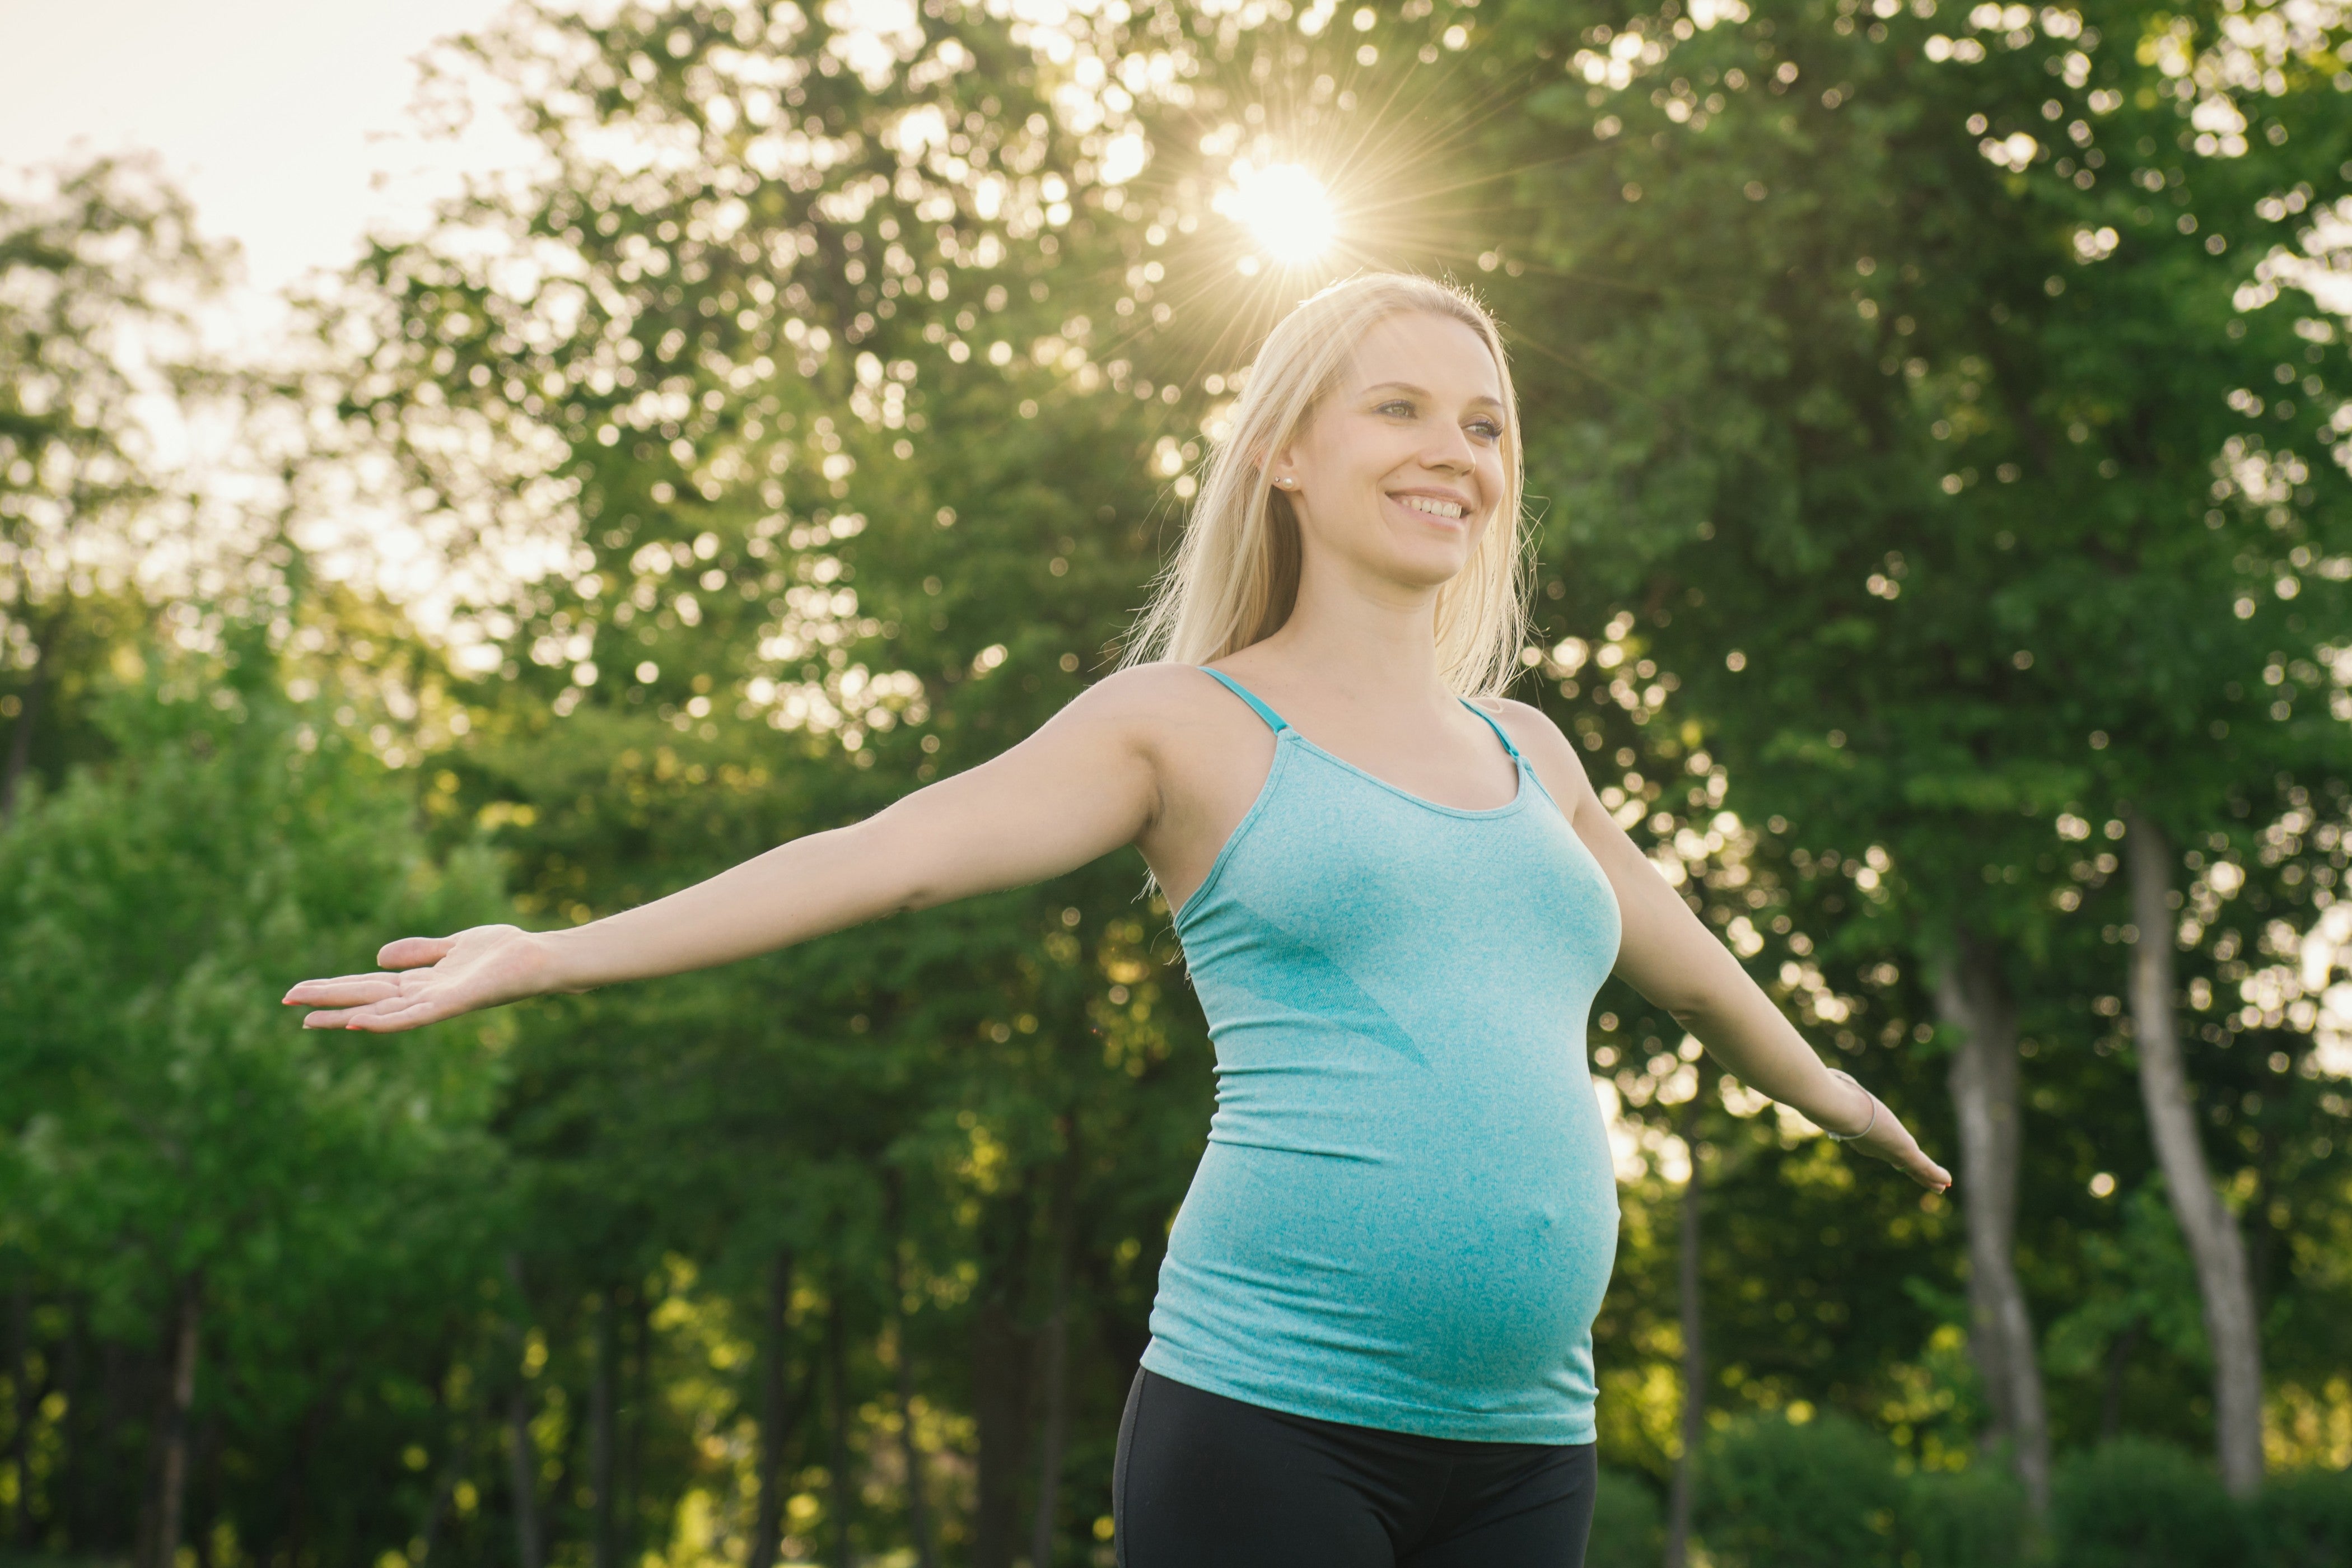 Pregnant woman out in nature with the sun shining behind her